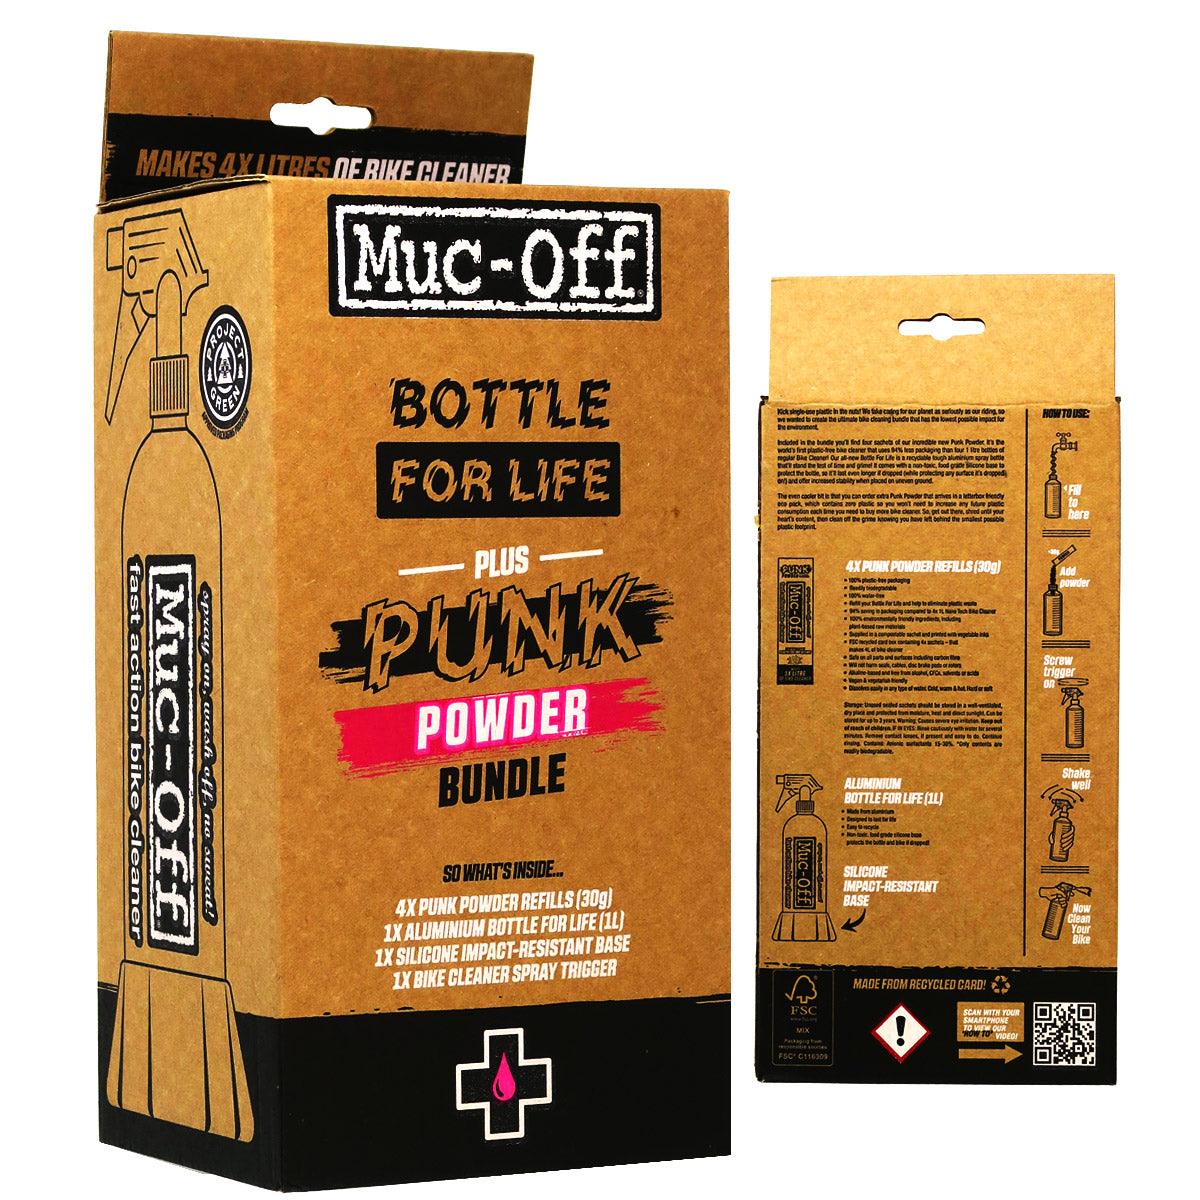 Muc-Off Bottle For Life Plus Punk Powder Bundle - The eco-friendly Bottle For Life cleaning solution for bikes of all kinds